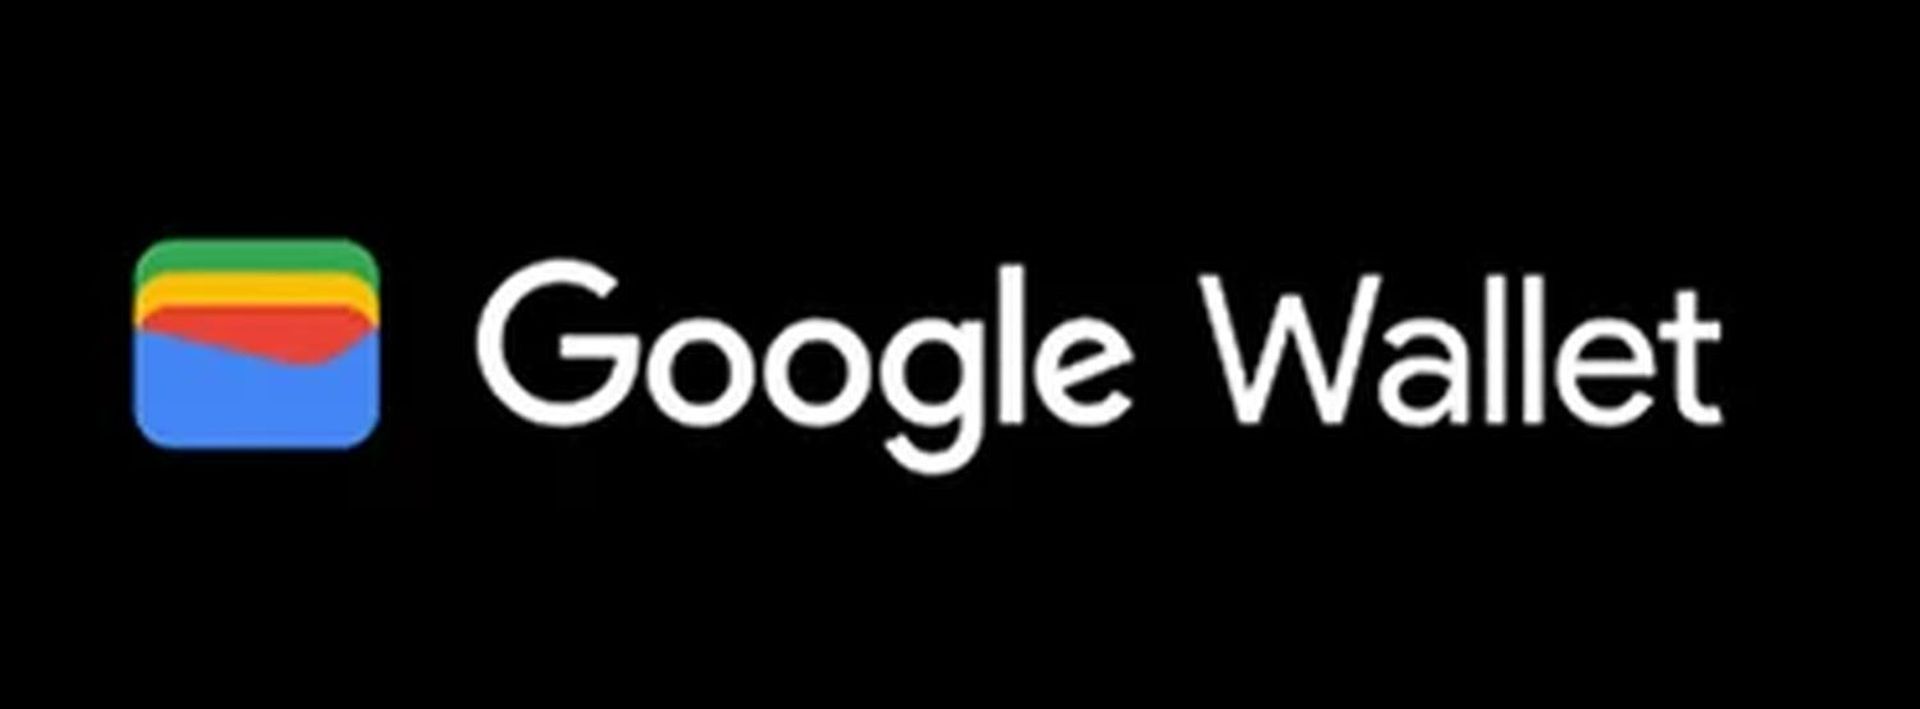 Learn why is Google Wallet not working with our comprehensive guide! Also, there are Google Wallet alternatives worth trying. Explore now!